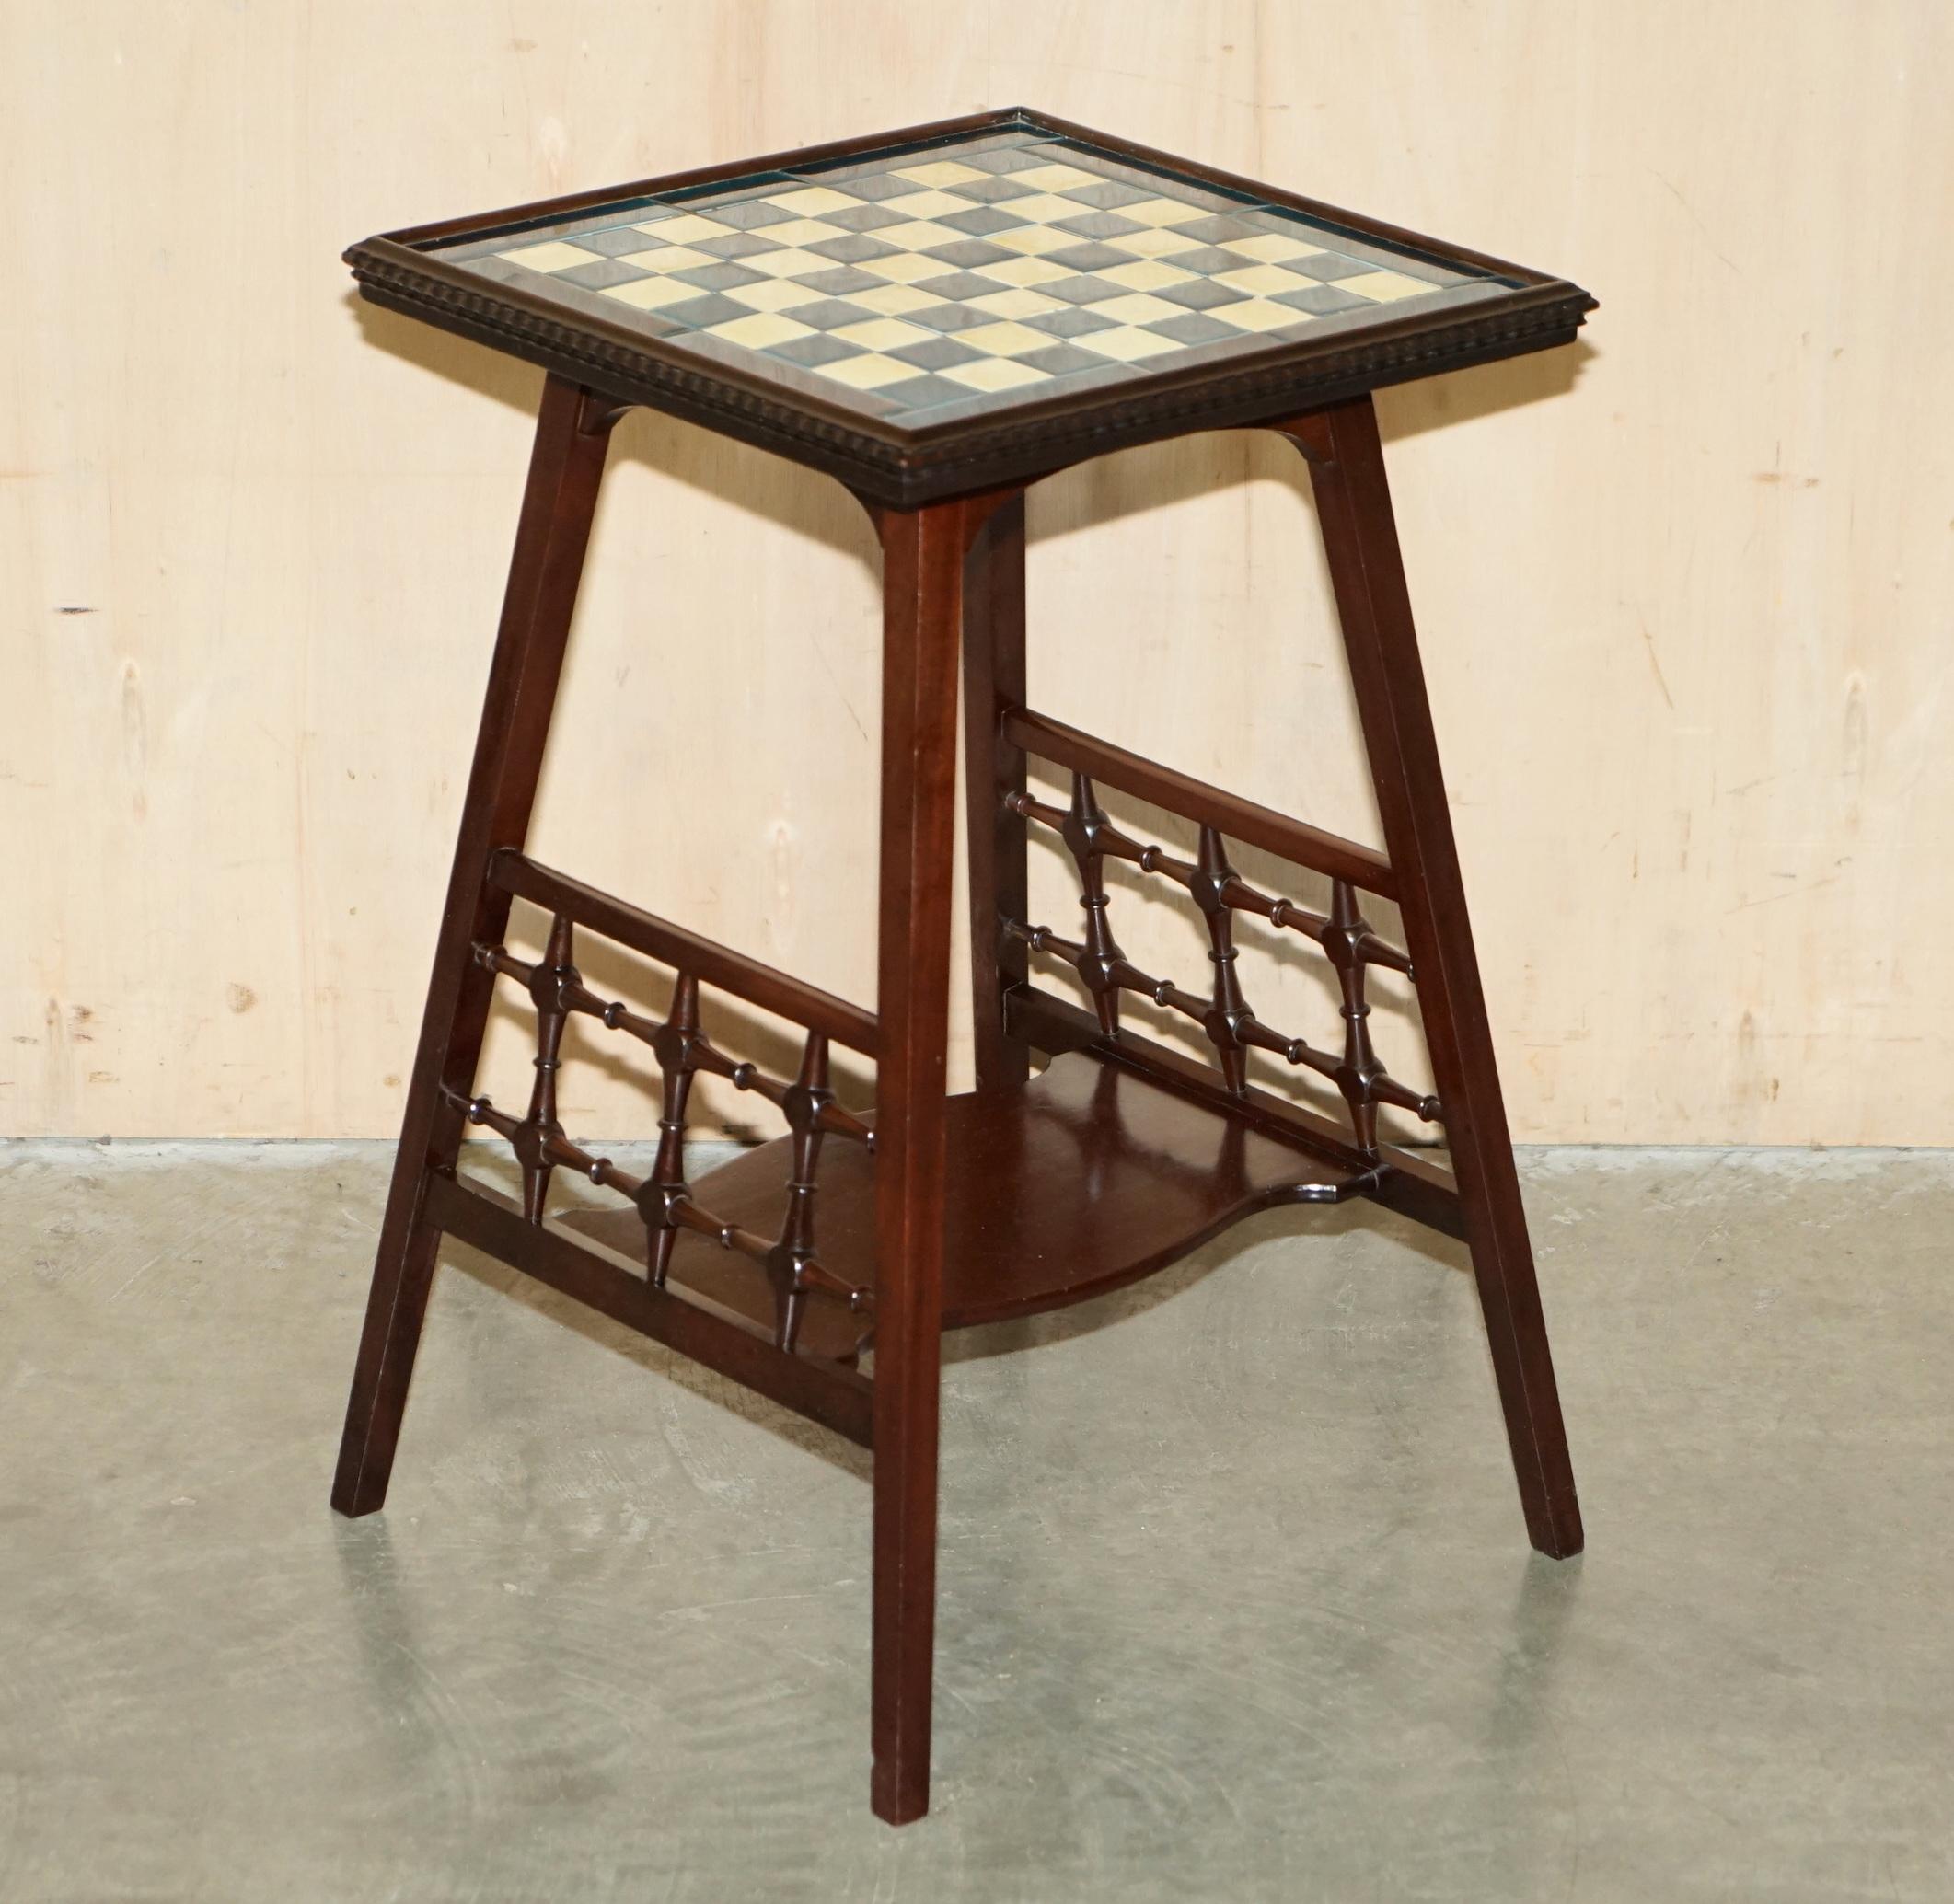 Royal House Antiques

Royal House Antiques is delighted to offer for sale this stunning antique Victorian Mahogany games table with Chessboard Tiled top and stamped to the base with the serial number

Please note the delivery fee listed is just a